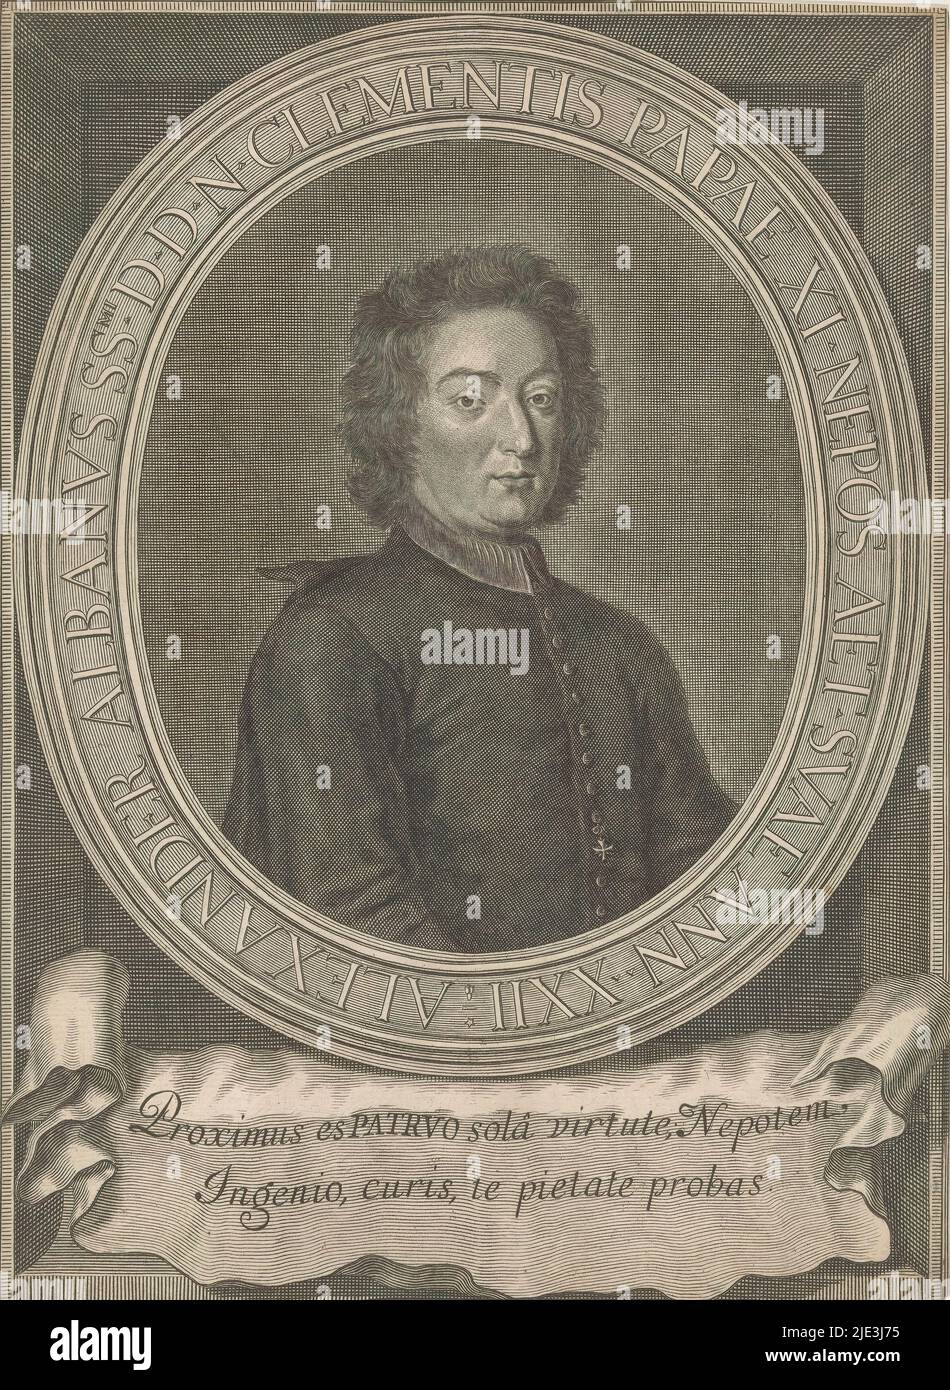 Portrait of Alessandro Albani at age 22, Portrait of Alessandro Albani in an oval frame with edge lettering. In a cartouche two lines of Latin text., print maker: anonymous, 1714 - 1799, paper, engraving, height 258 mm × width 188 mm Stock Photo